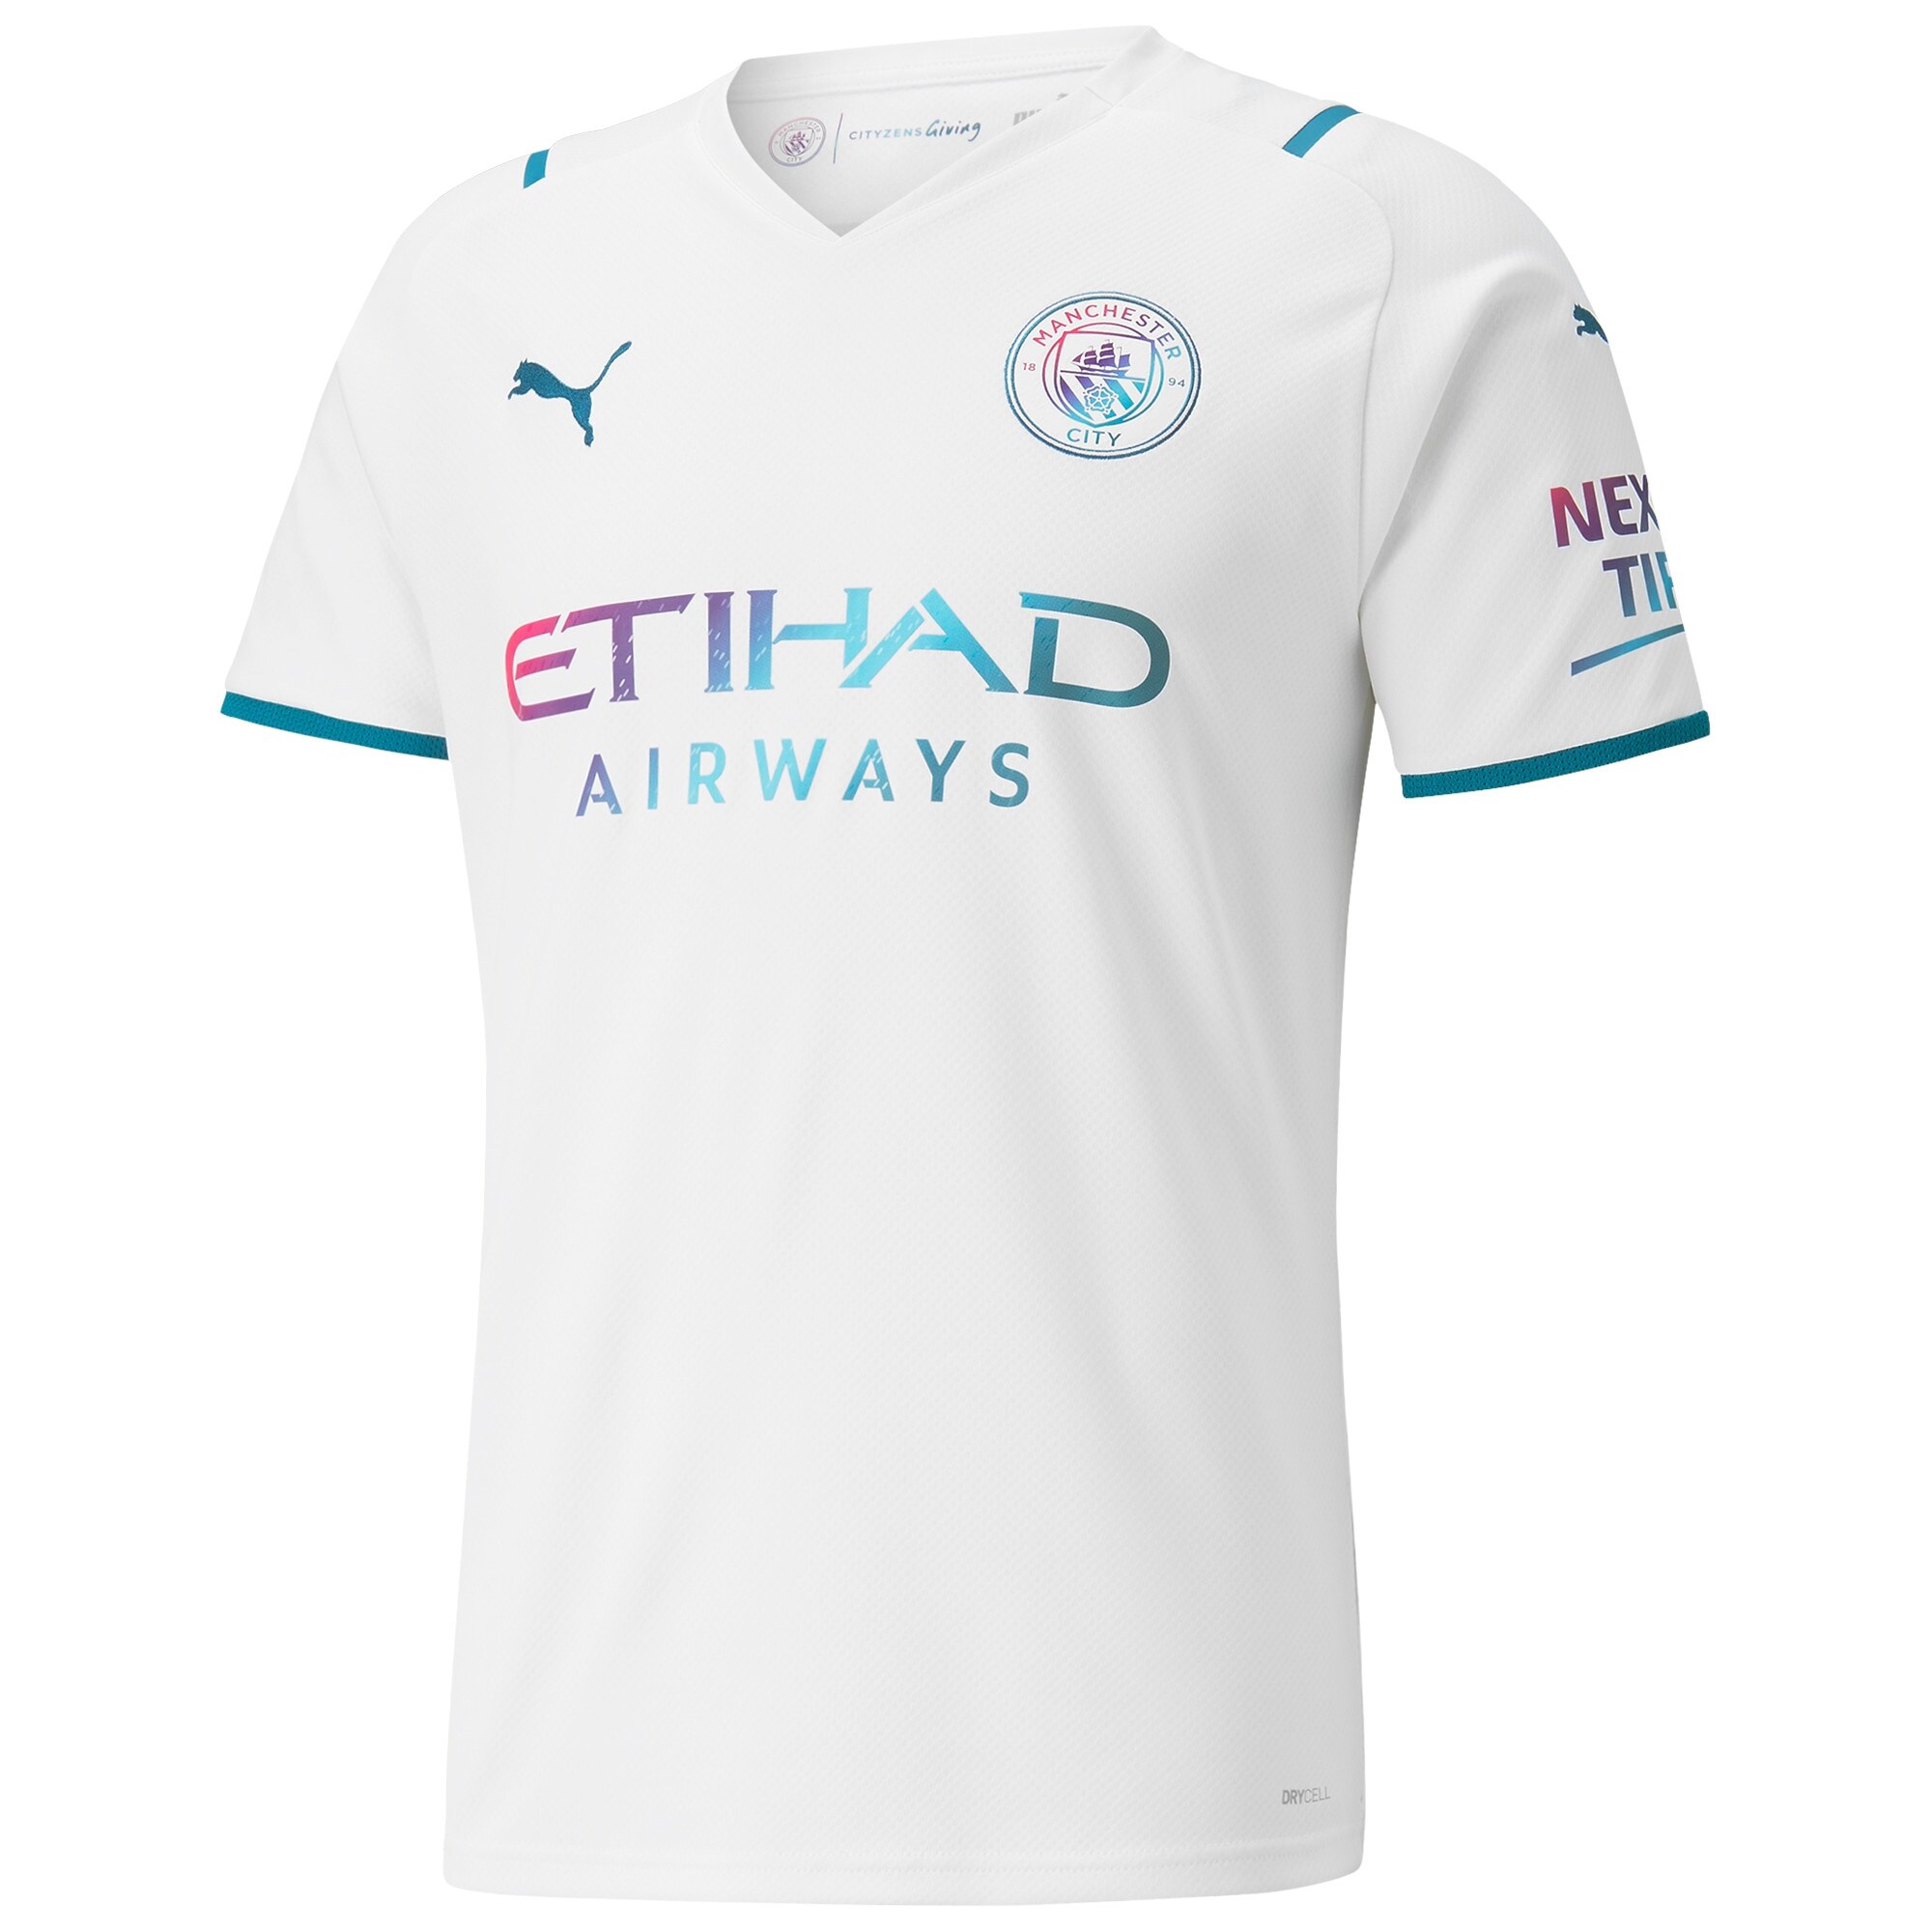 Manchester City Away Shirt 2021-22 with G.Jesus 9 printing